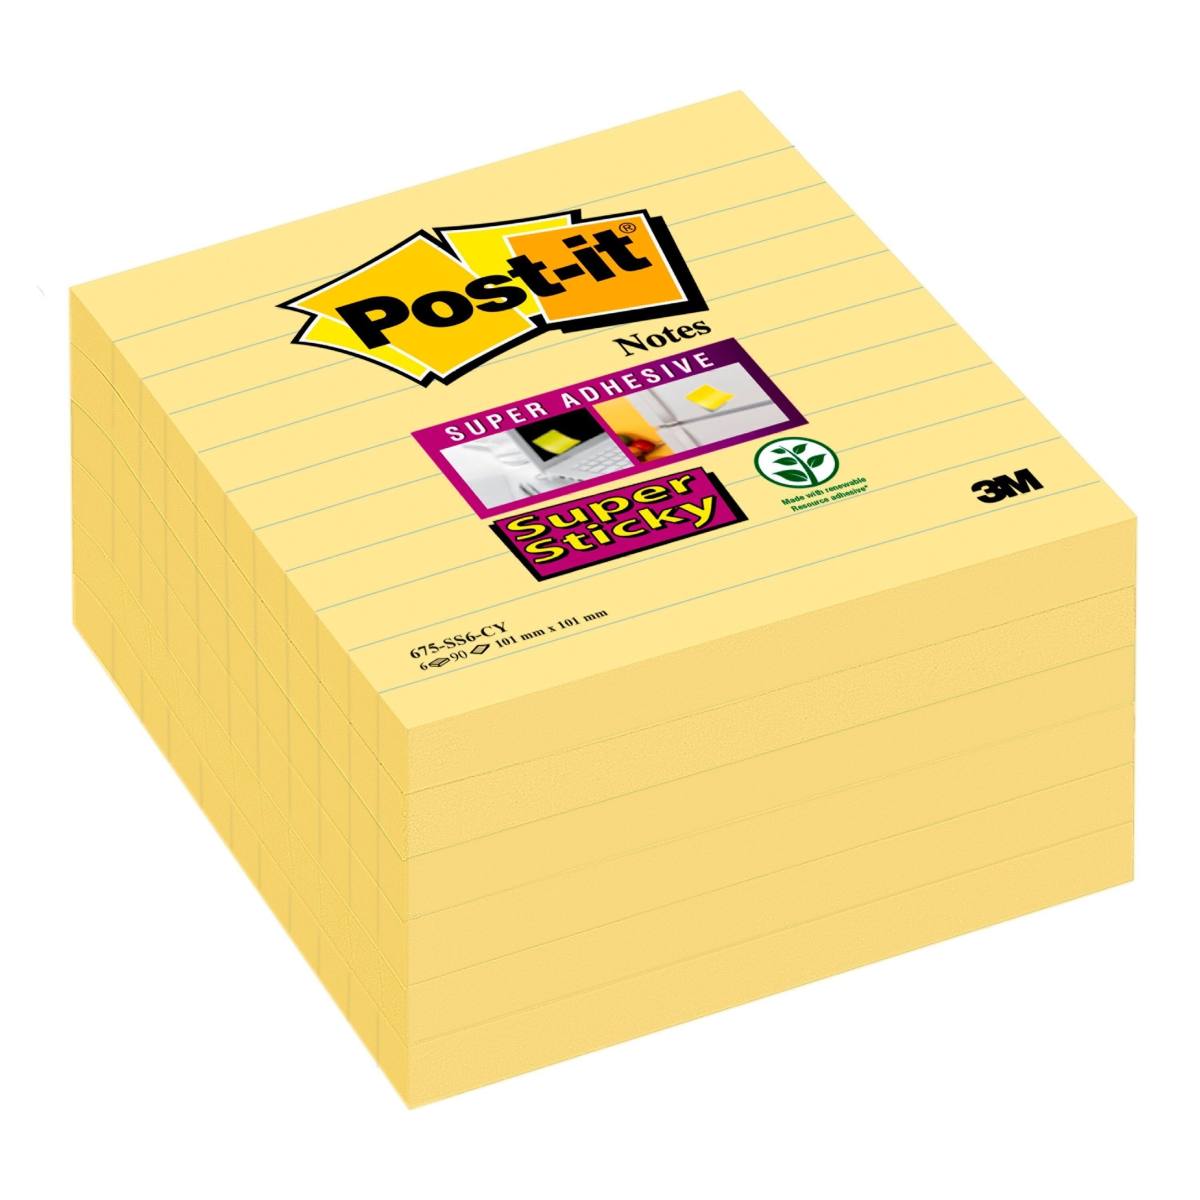 3M Post-it Super Sticky Notes 675-6SCY, 101 mm x 101 mm, yellow, 6 pads of 90 sheets each